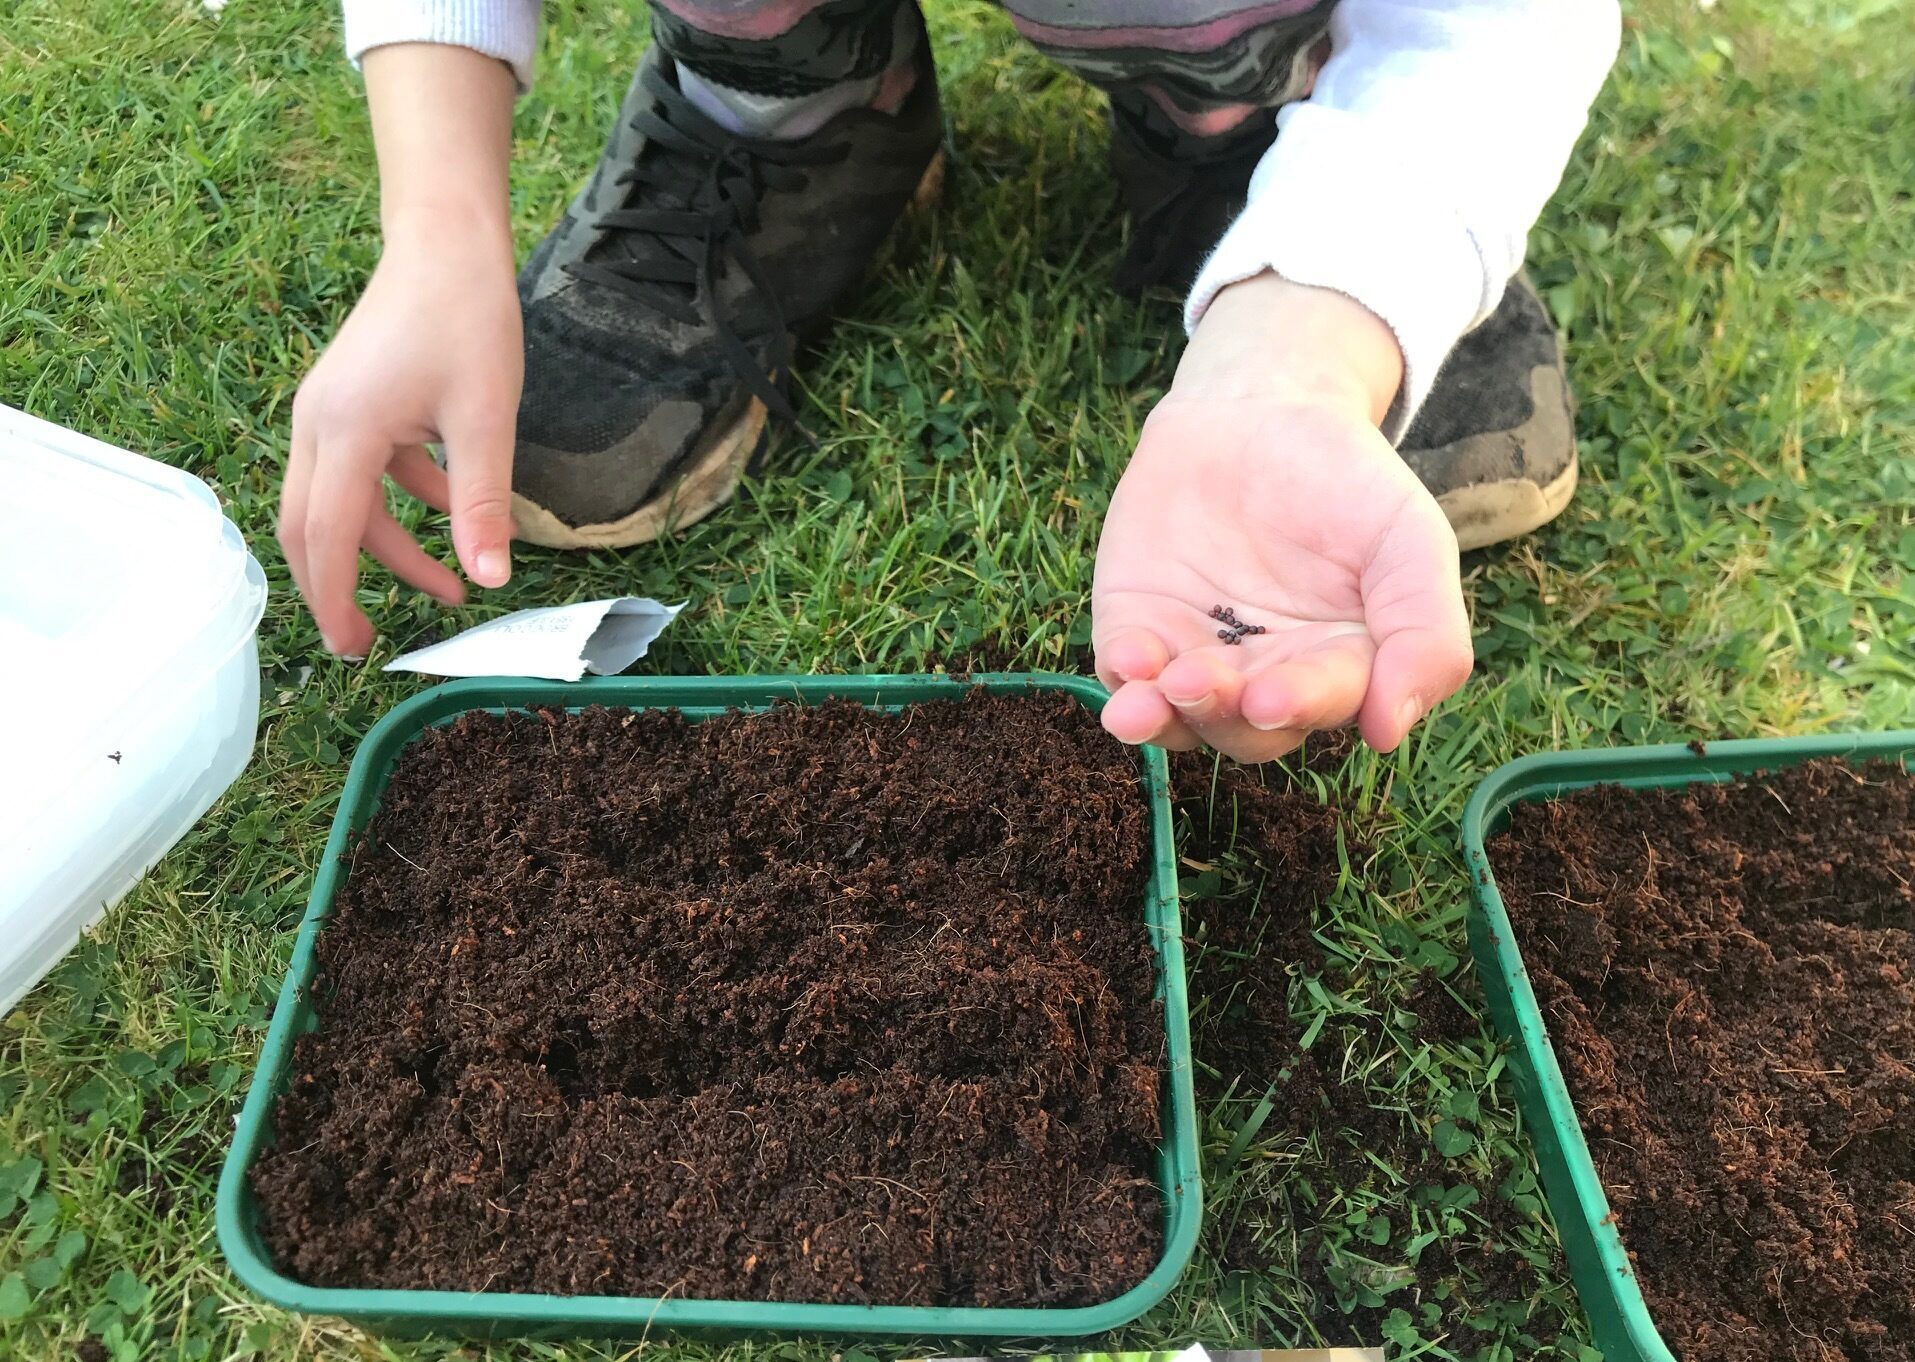 Child holding seeds in their left hand ready to plant them in a seed tray filled with compost.